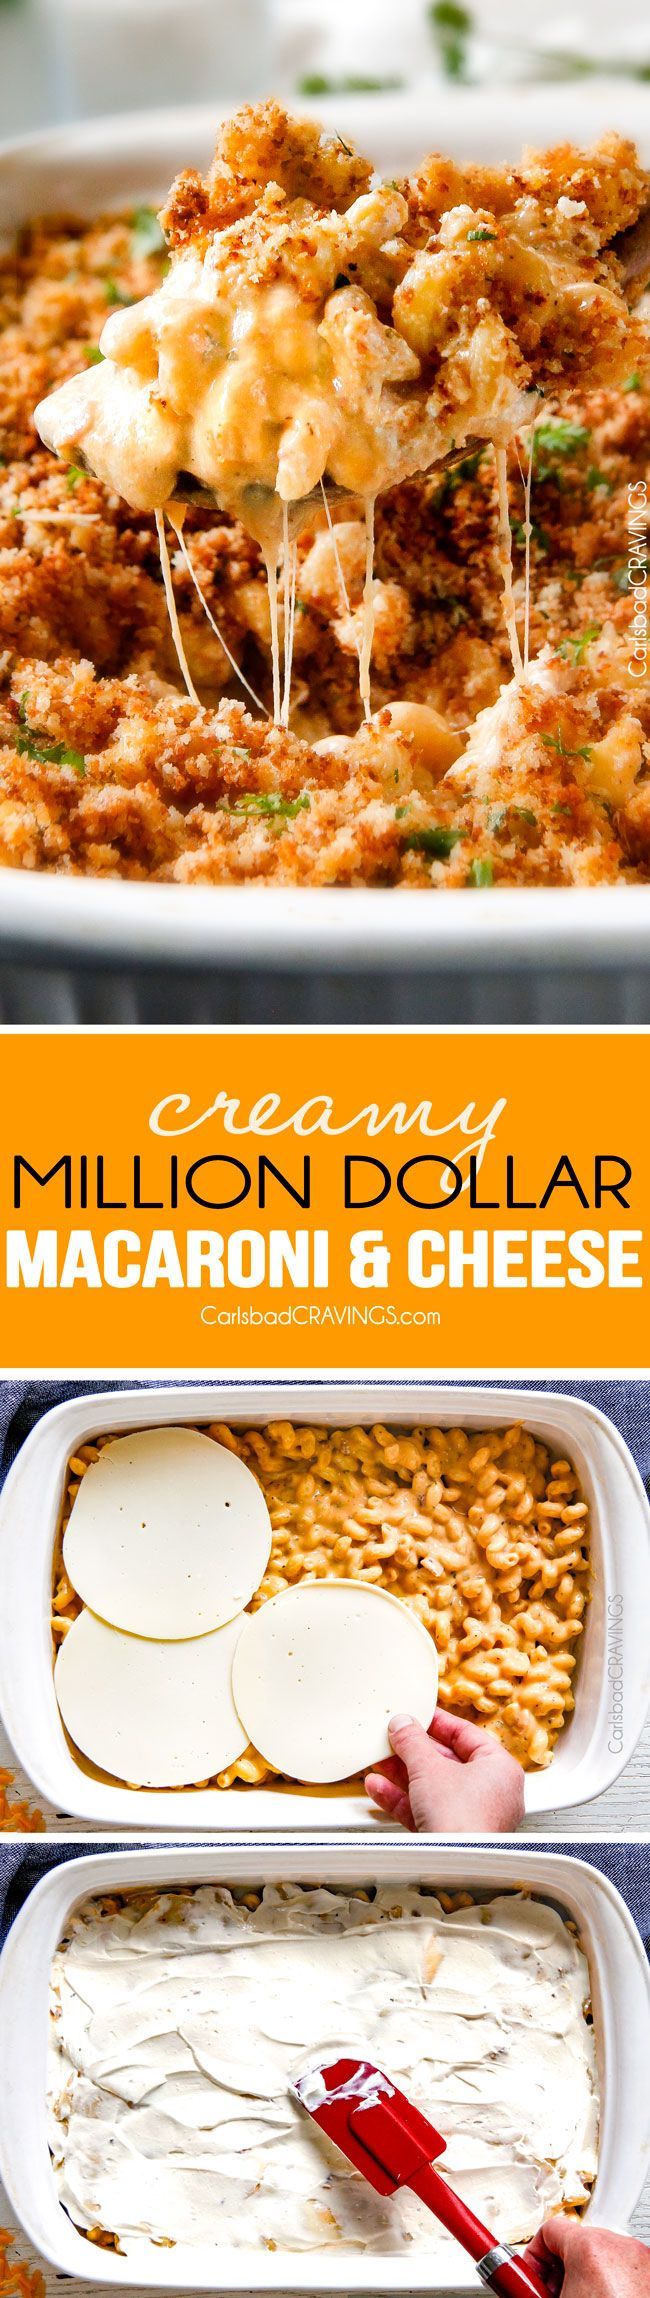 This mega creamy Million Dollar Macaroni and Cheese Casserole is the only macaroni cheese recipe I wil